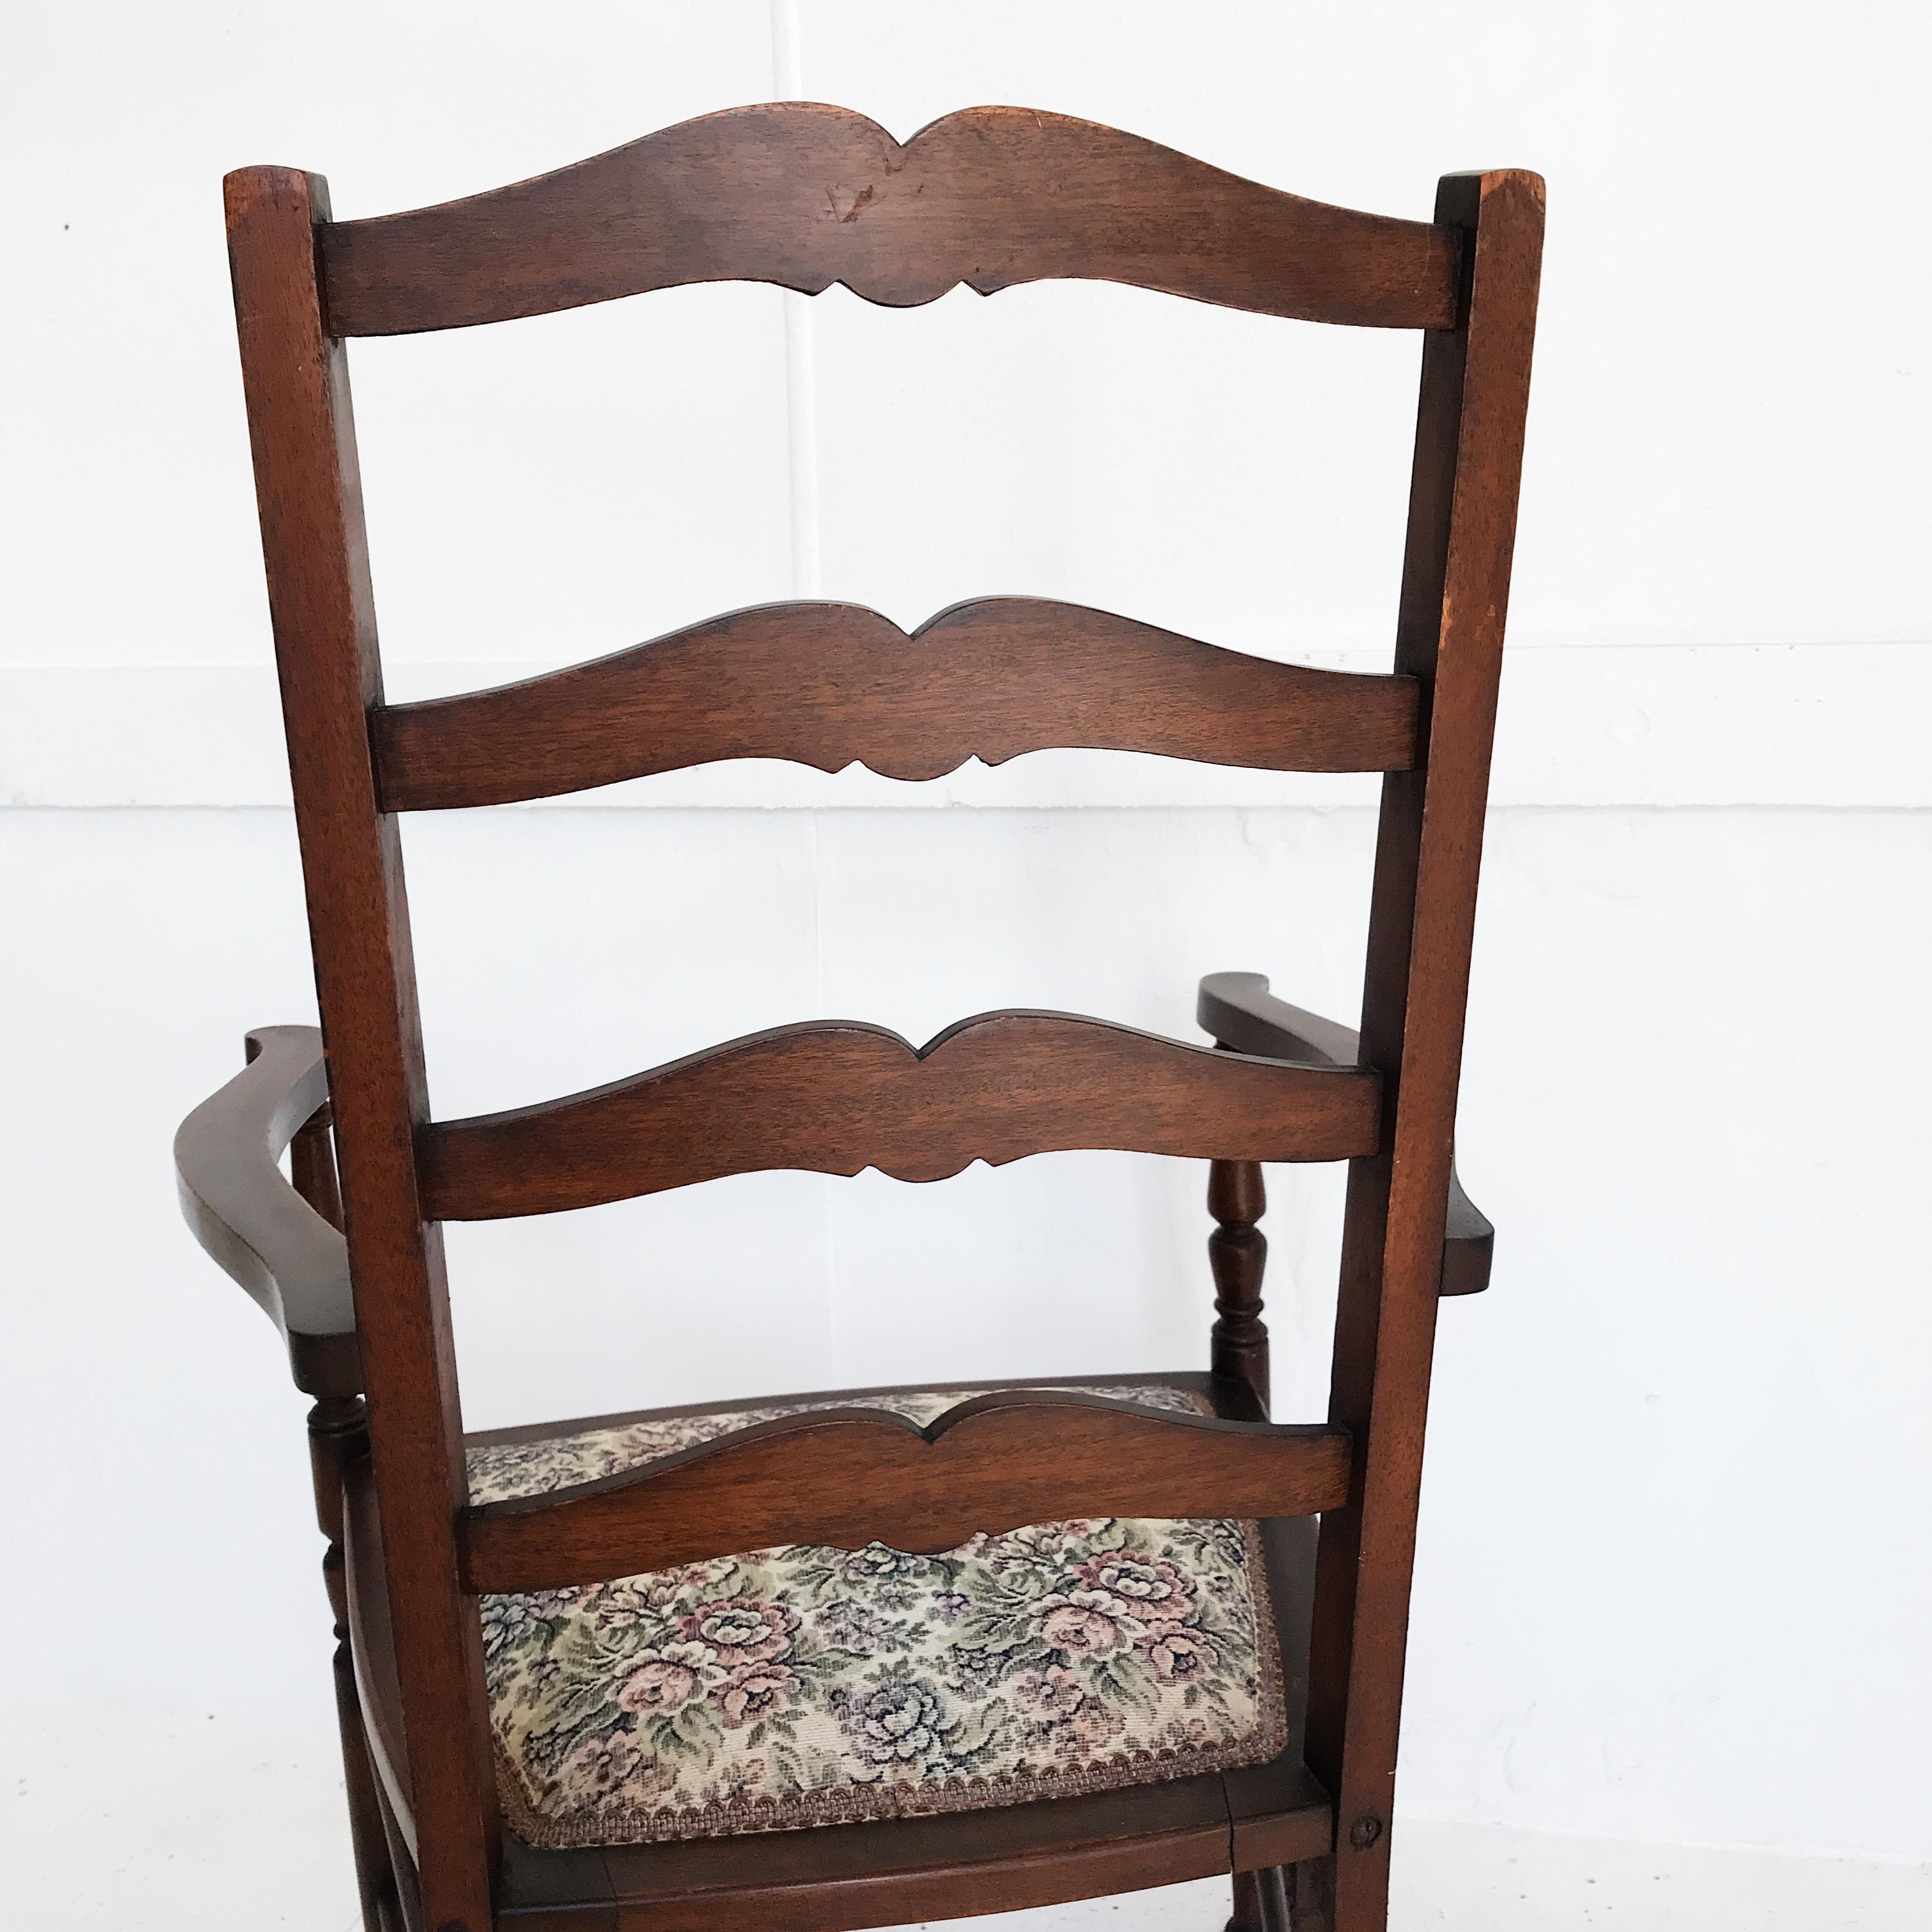 Early-20th Century Ladder Back Chair by Beard Watson Limited, Sydney, Australia For Sale 1